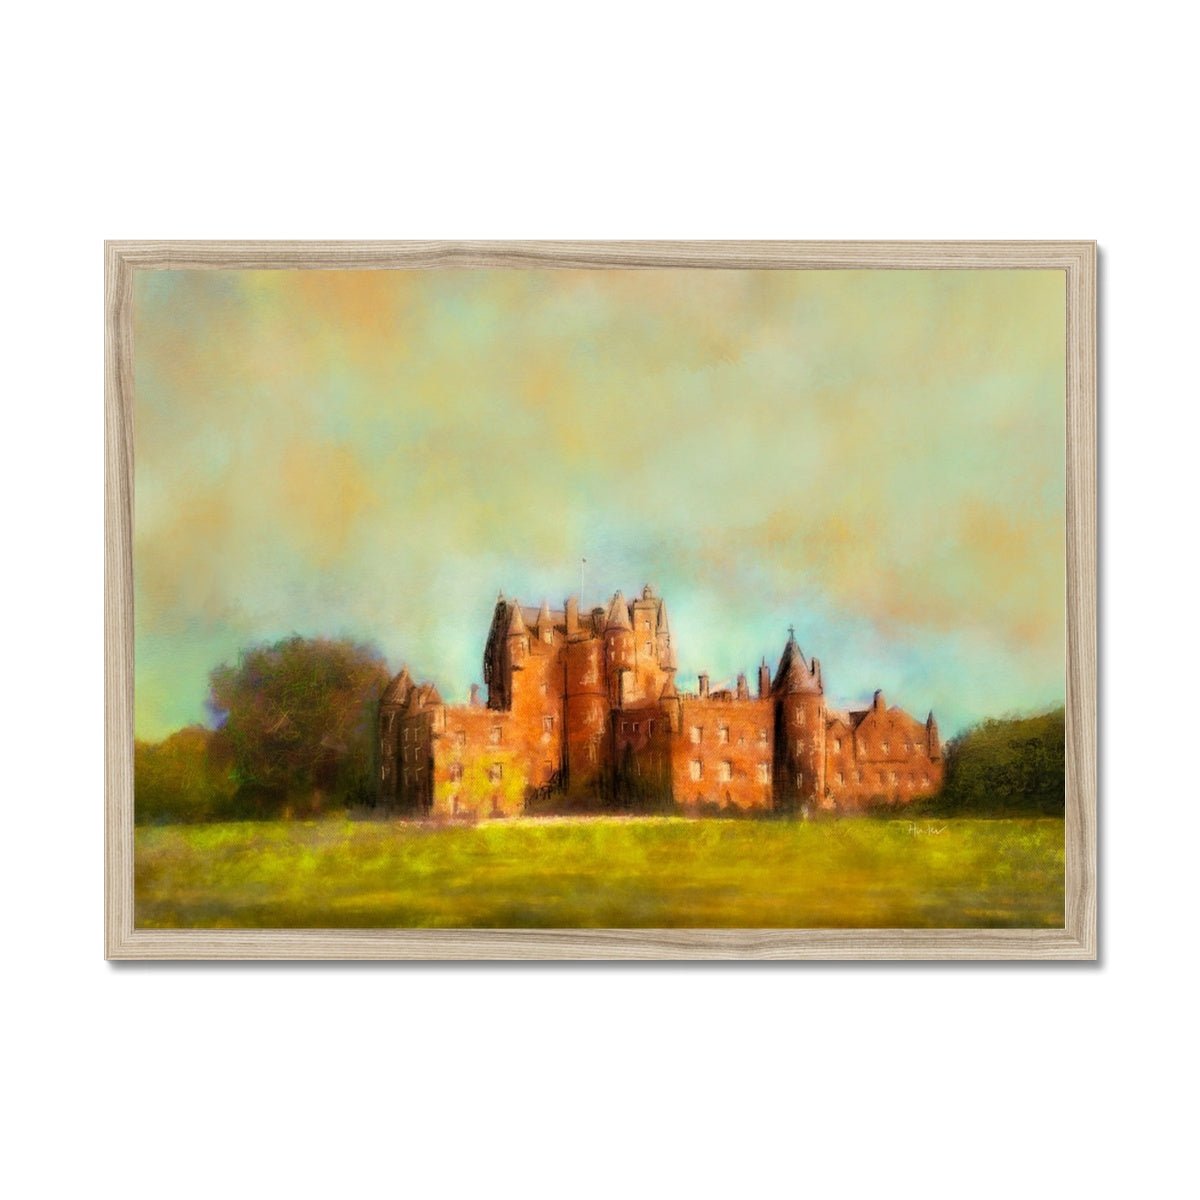 Glamis Castle Painting | Framed Prints From Scotland-Framed Prints-Historic & Iconic Scotland Art Gallery-A2 Landscape-Natural Frame-Paintings, Prints, Homeware, Art Gifts From Scotland By Scottish Artist Kevin Hunter